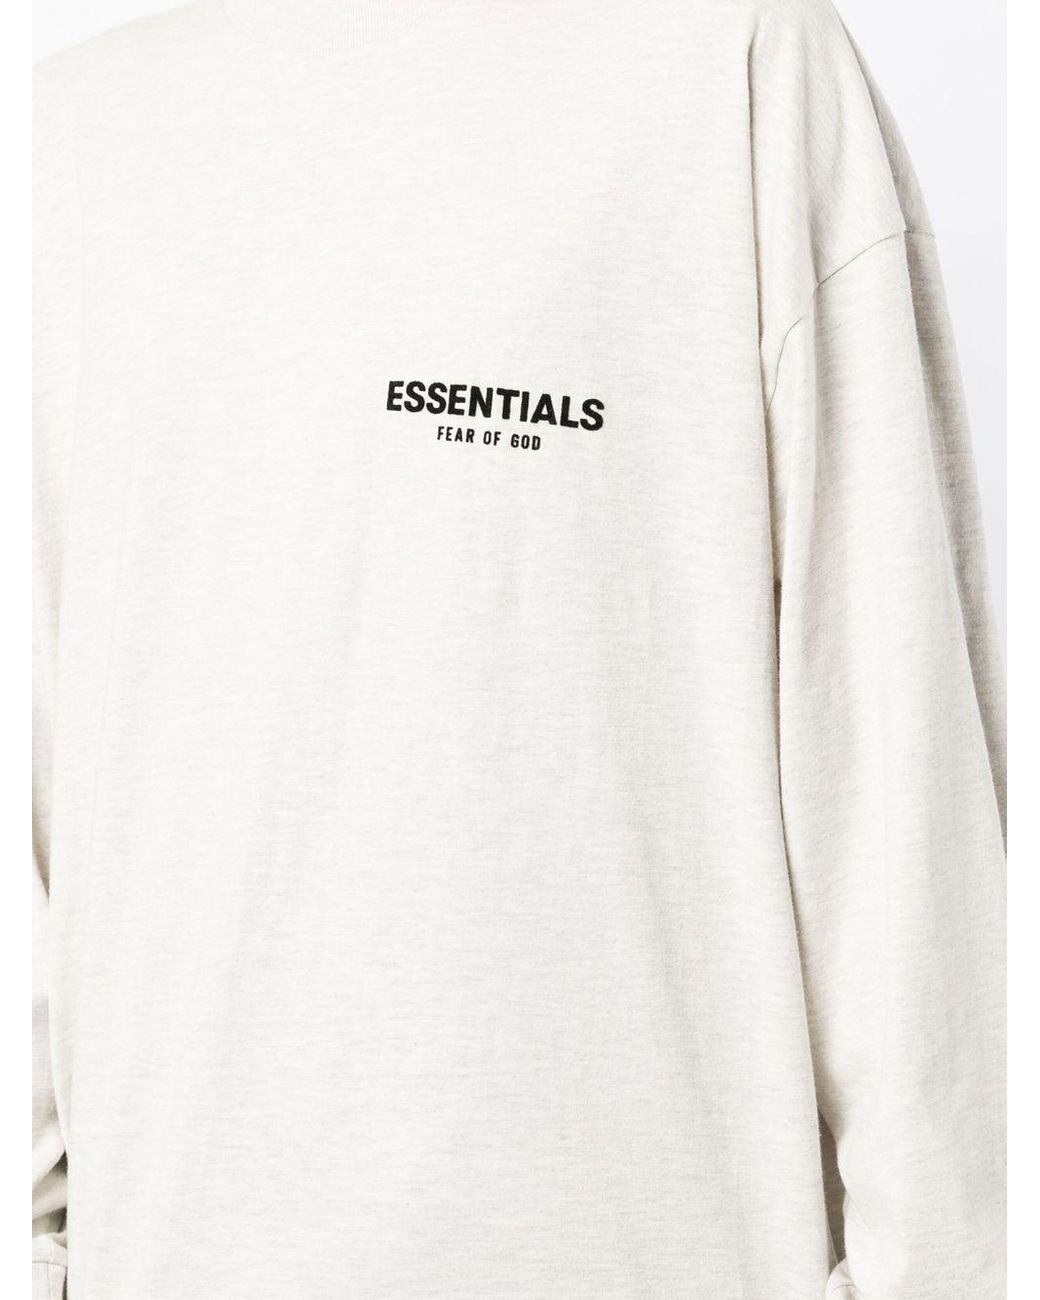 NEW WE THE ESSENTIALS, WHITE